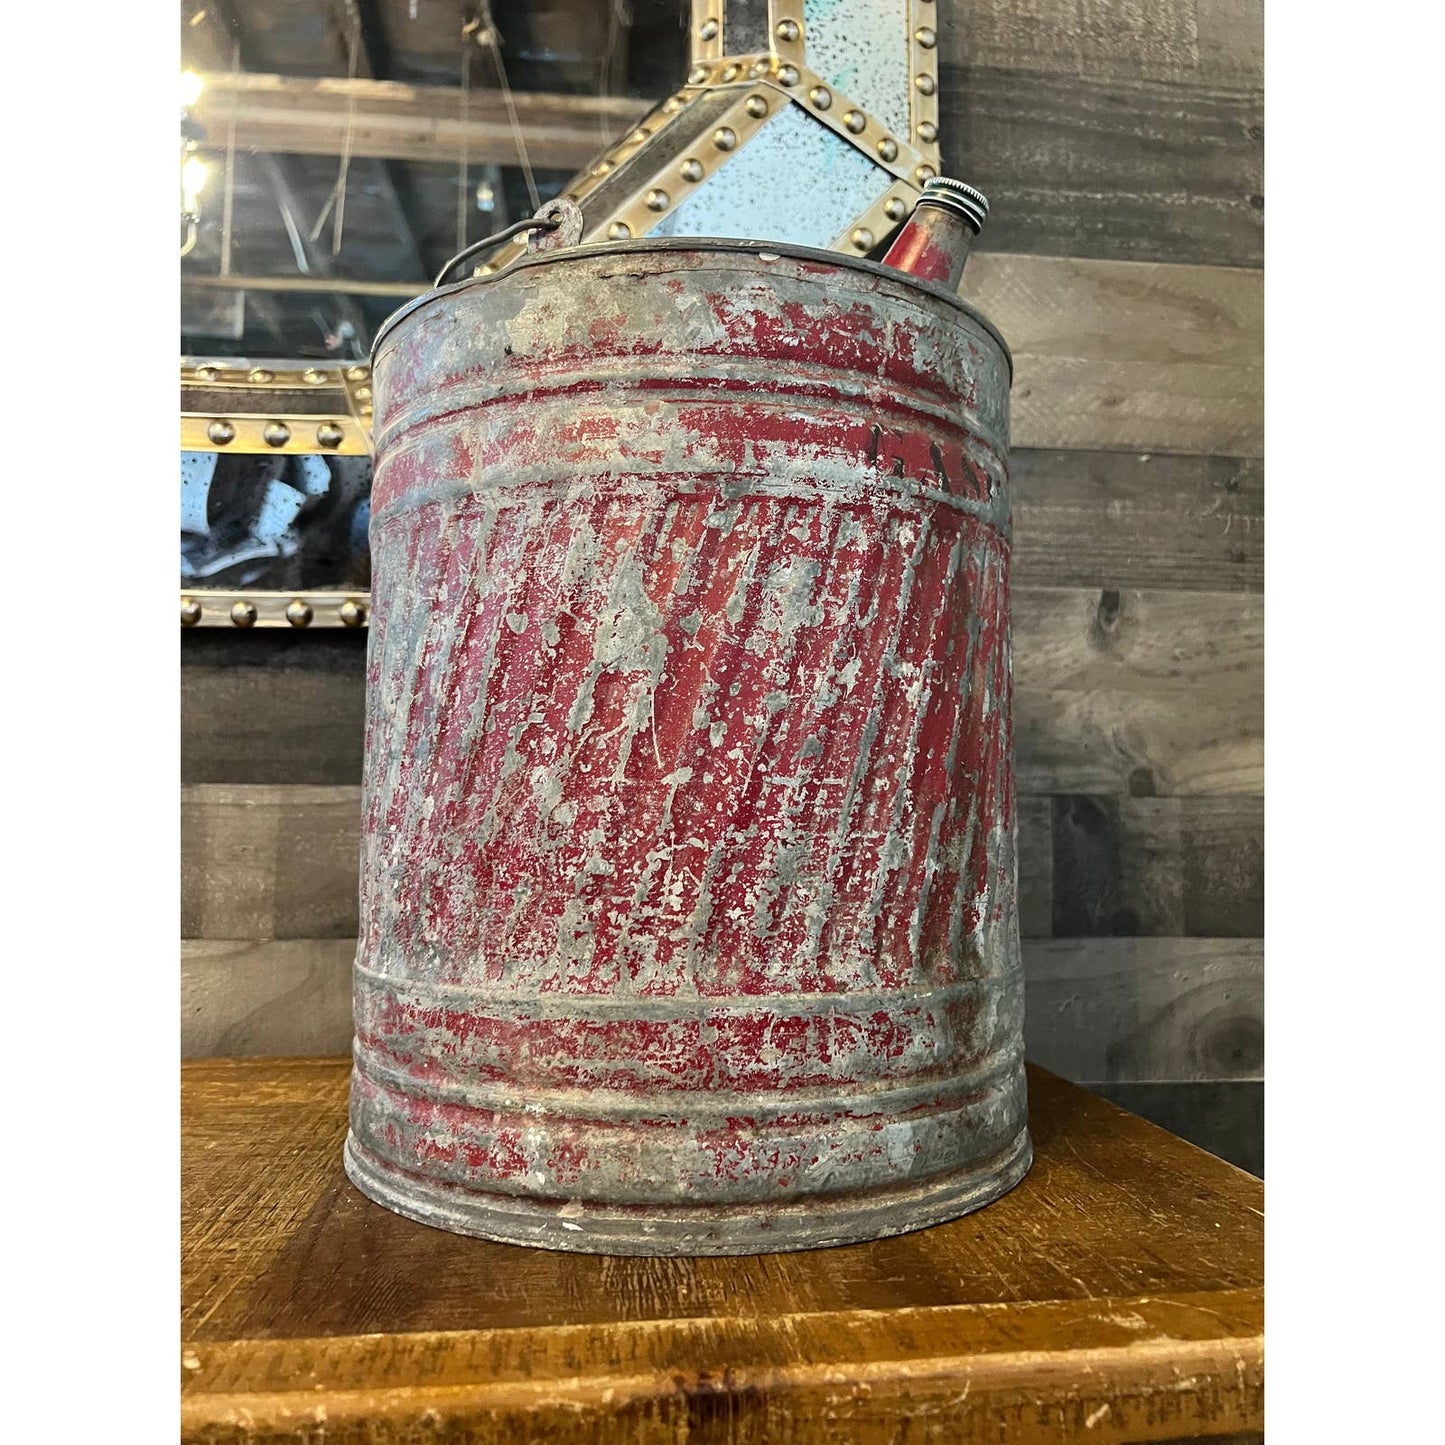 Vintage galvanized rustic metal handles gasoline can - red chipped paint gasoline can with handle and spout